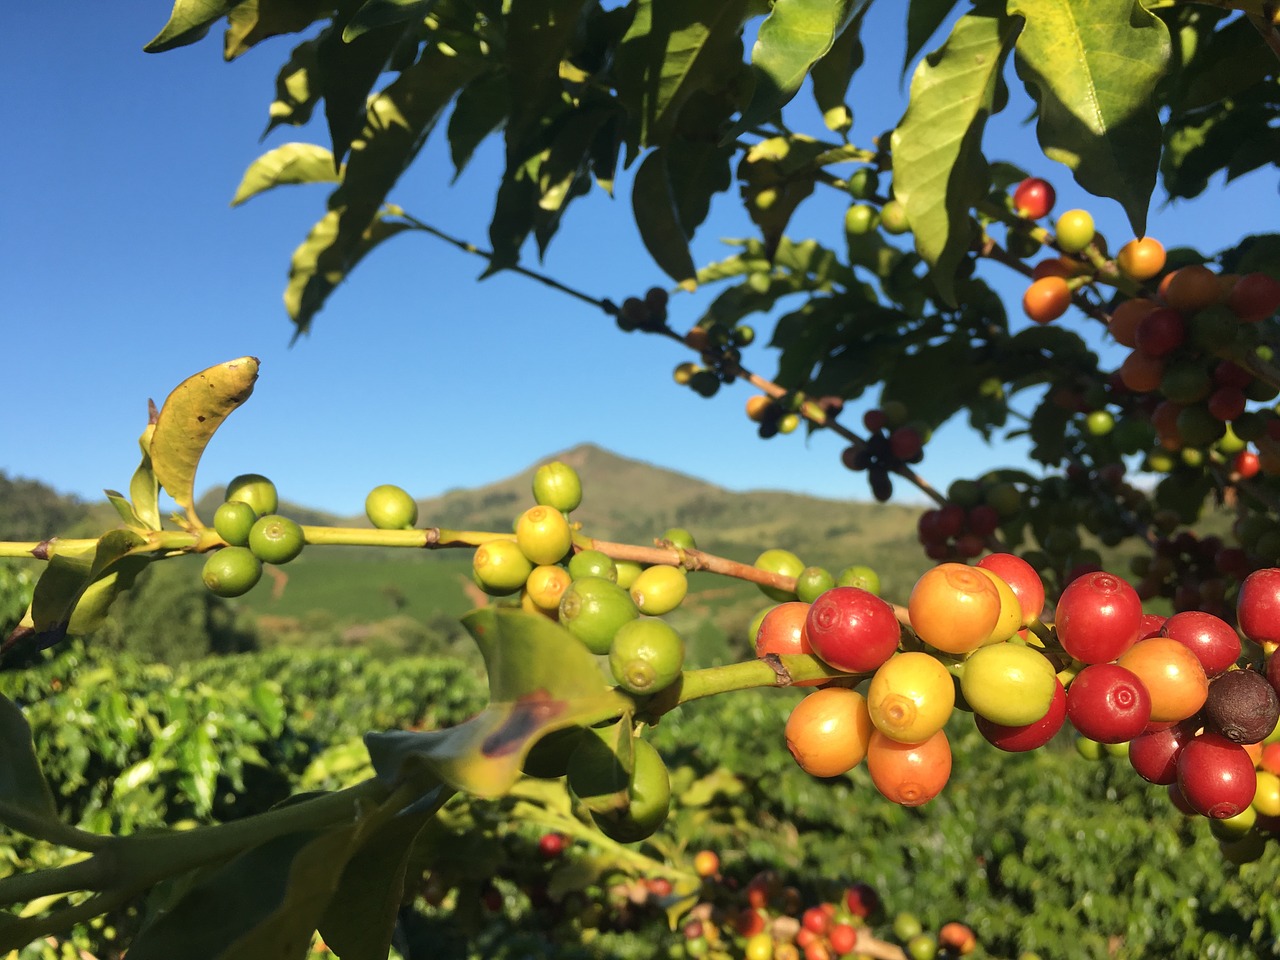 Brazil’s Recent Drought Impacts Coffee and Orange Production